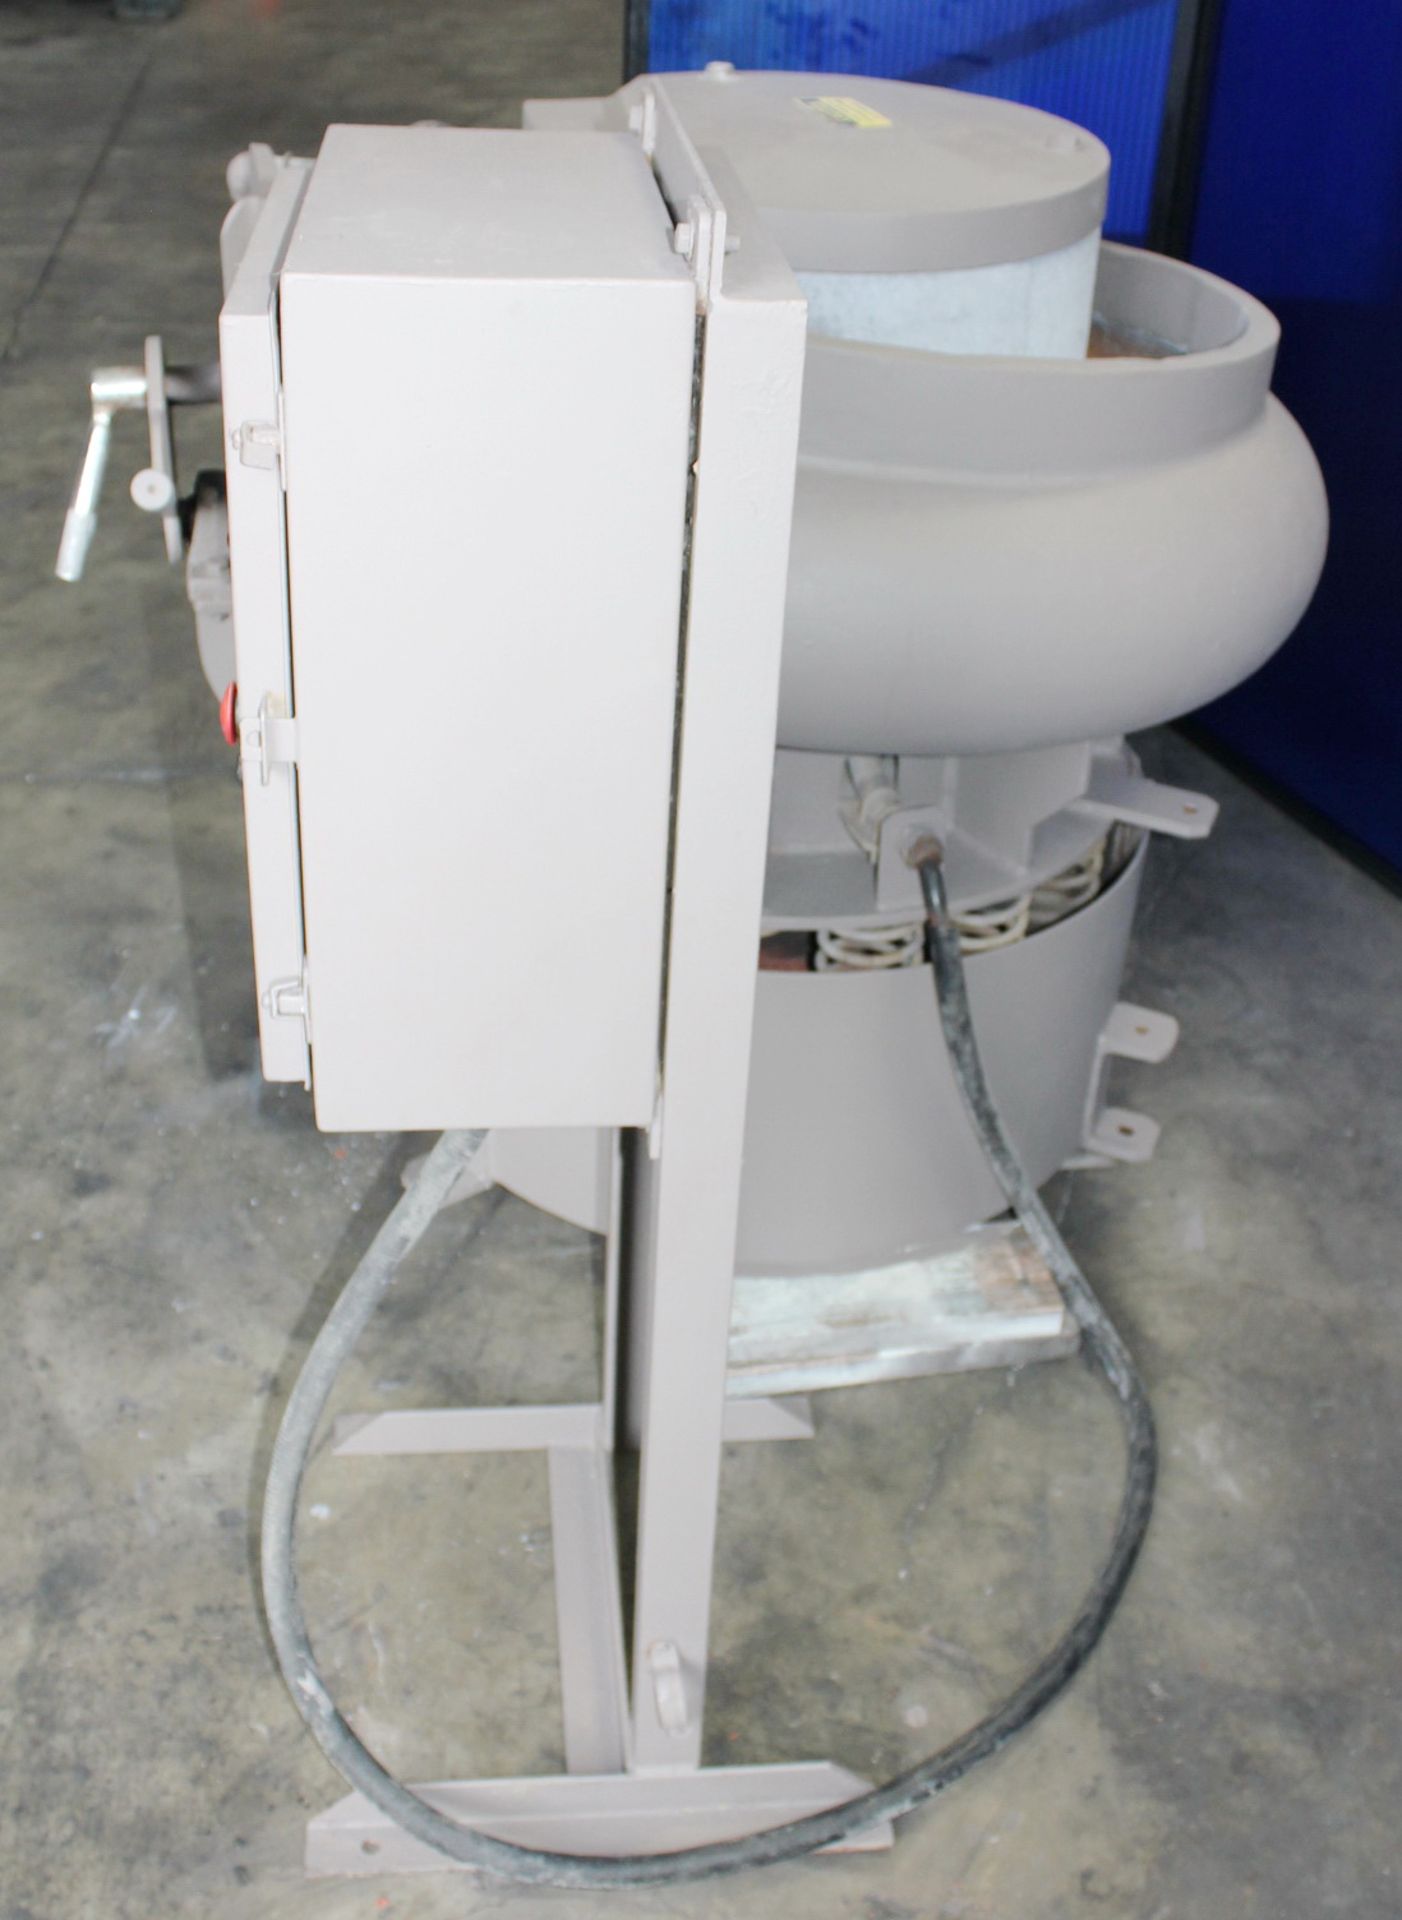 Gyromatic - Vibratory Deburring Machine (Bowl Type) | 4.5 Cubic Feet, Located In Huntington Park, CA - Image 5 of 13